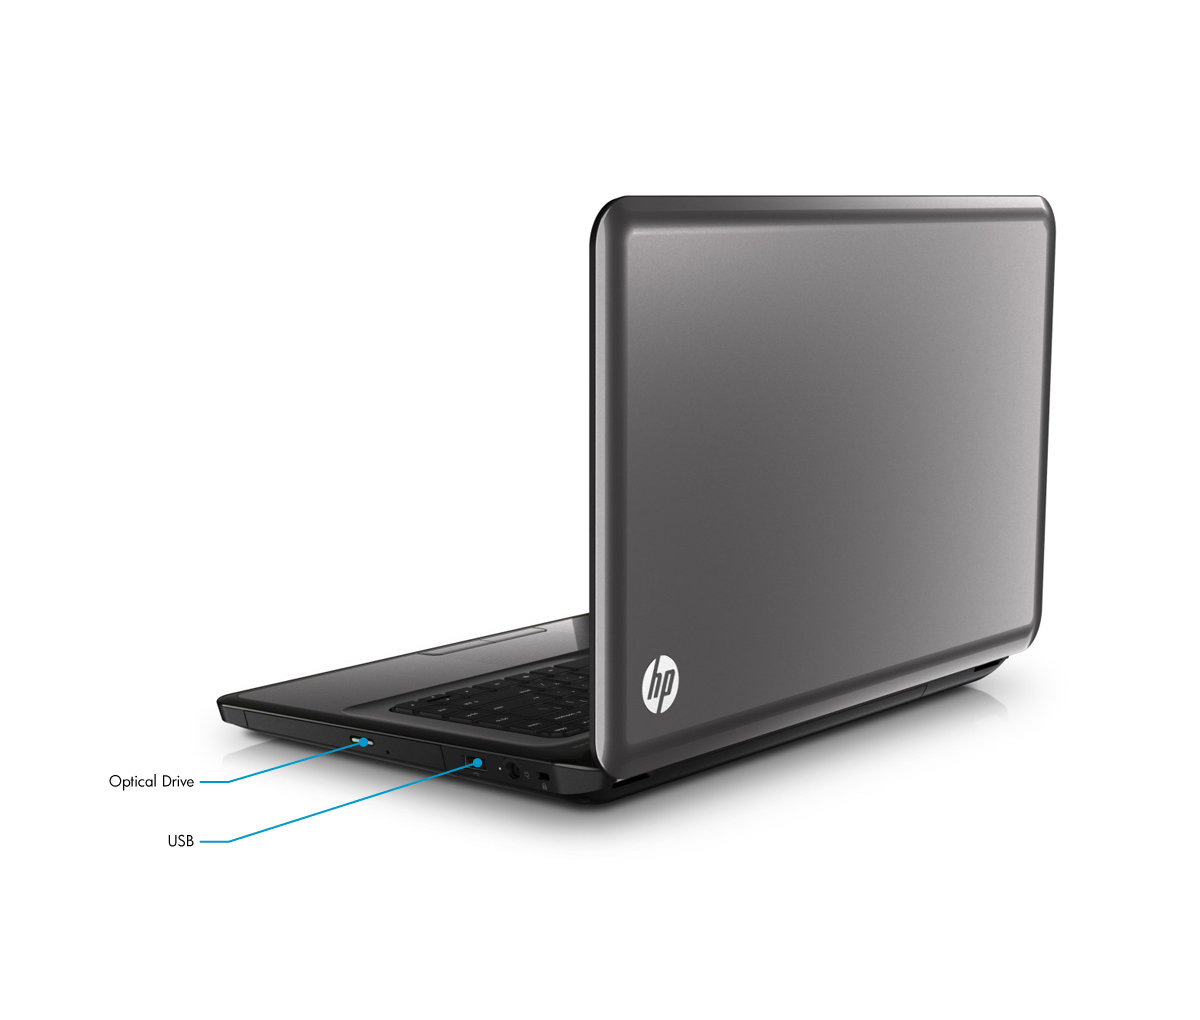 HP Pavilion g6-1d60us Notebook PC Right View